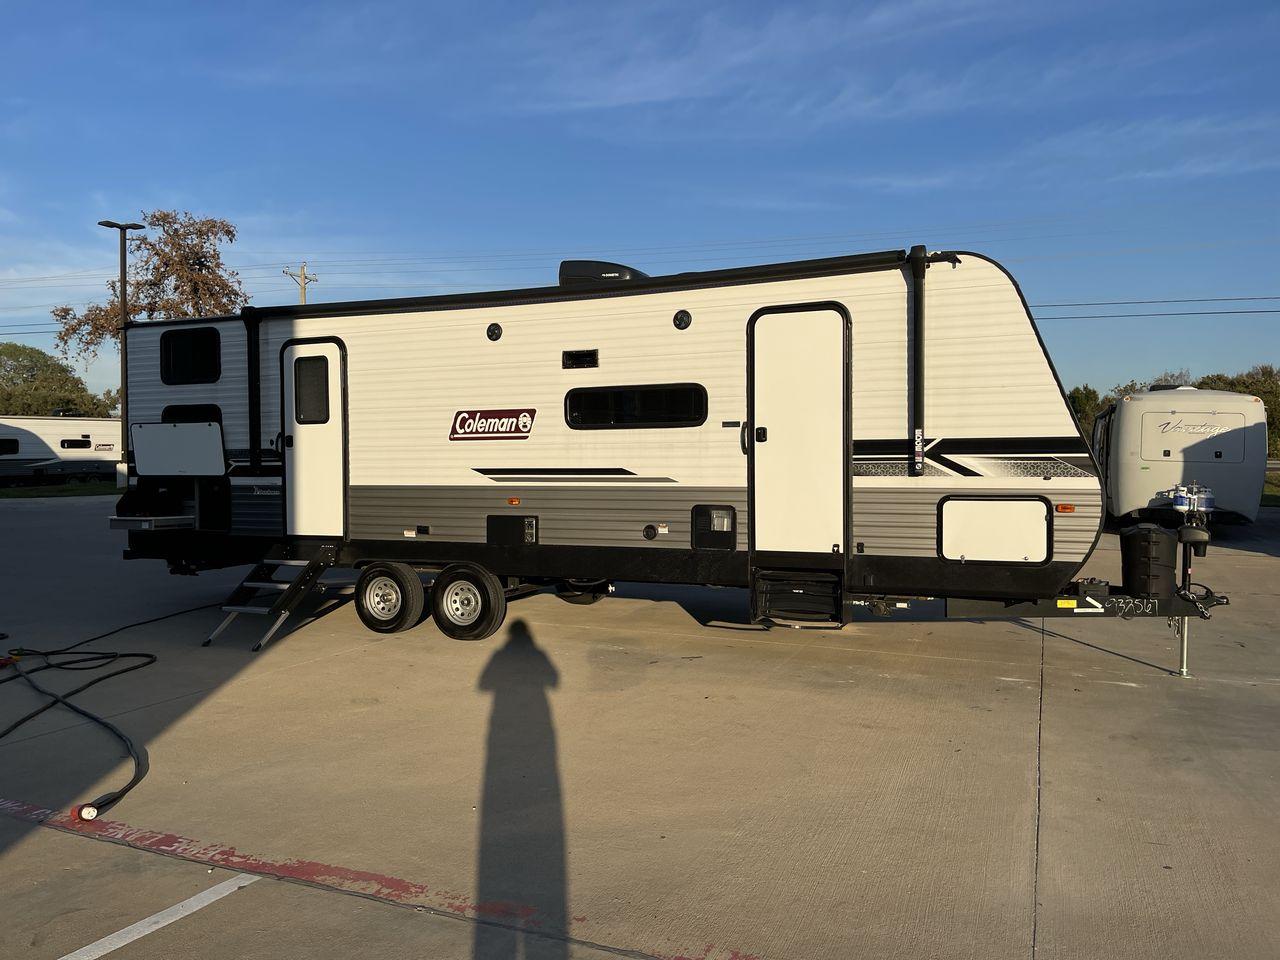 2022 KEYSTONE COLEMAN 285BH (4YDTCMN28NH) , Length: 32.75 ft | Dry Weight: 6,611 lbs. | Slides: 1 transmission, located at 4319 N Main Street, Cleburne, TX, 76033, (817) 221-0660, 32.435829, -97.384178 - Experience the ultimate blend of comfort and adventure with the 2022 Keystone Coleman 285BH. This meticulously designed travel trailer is perfect for enhancing your camping experience. Adjusting the specifications, this model extends to a generous 32.75 feet with a dry weight of 6,611 lbs, providing - Photo #24